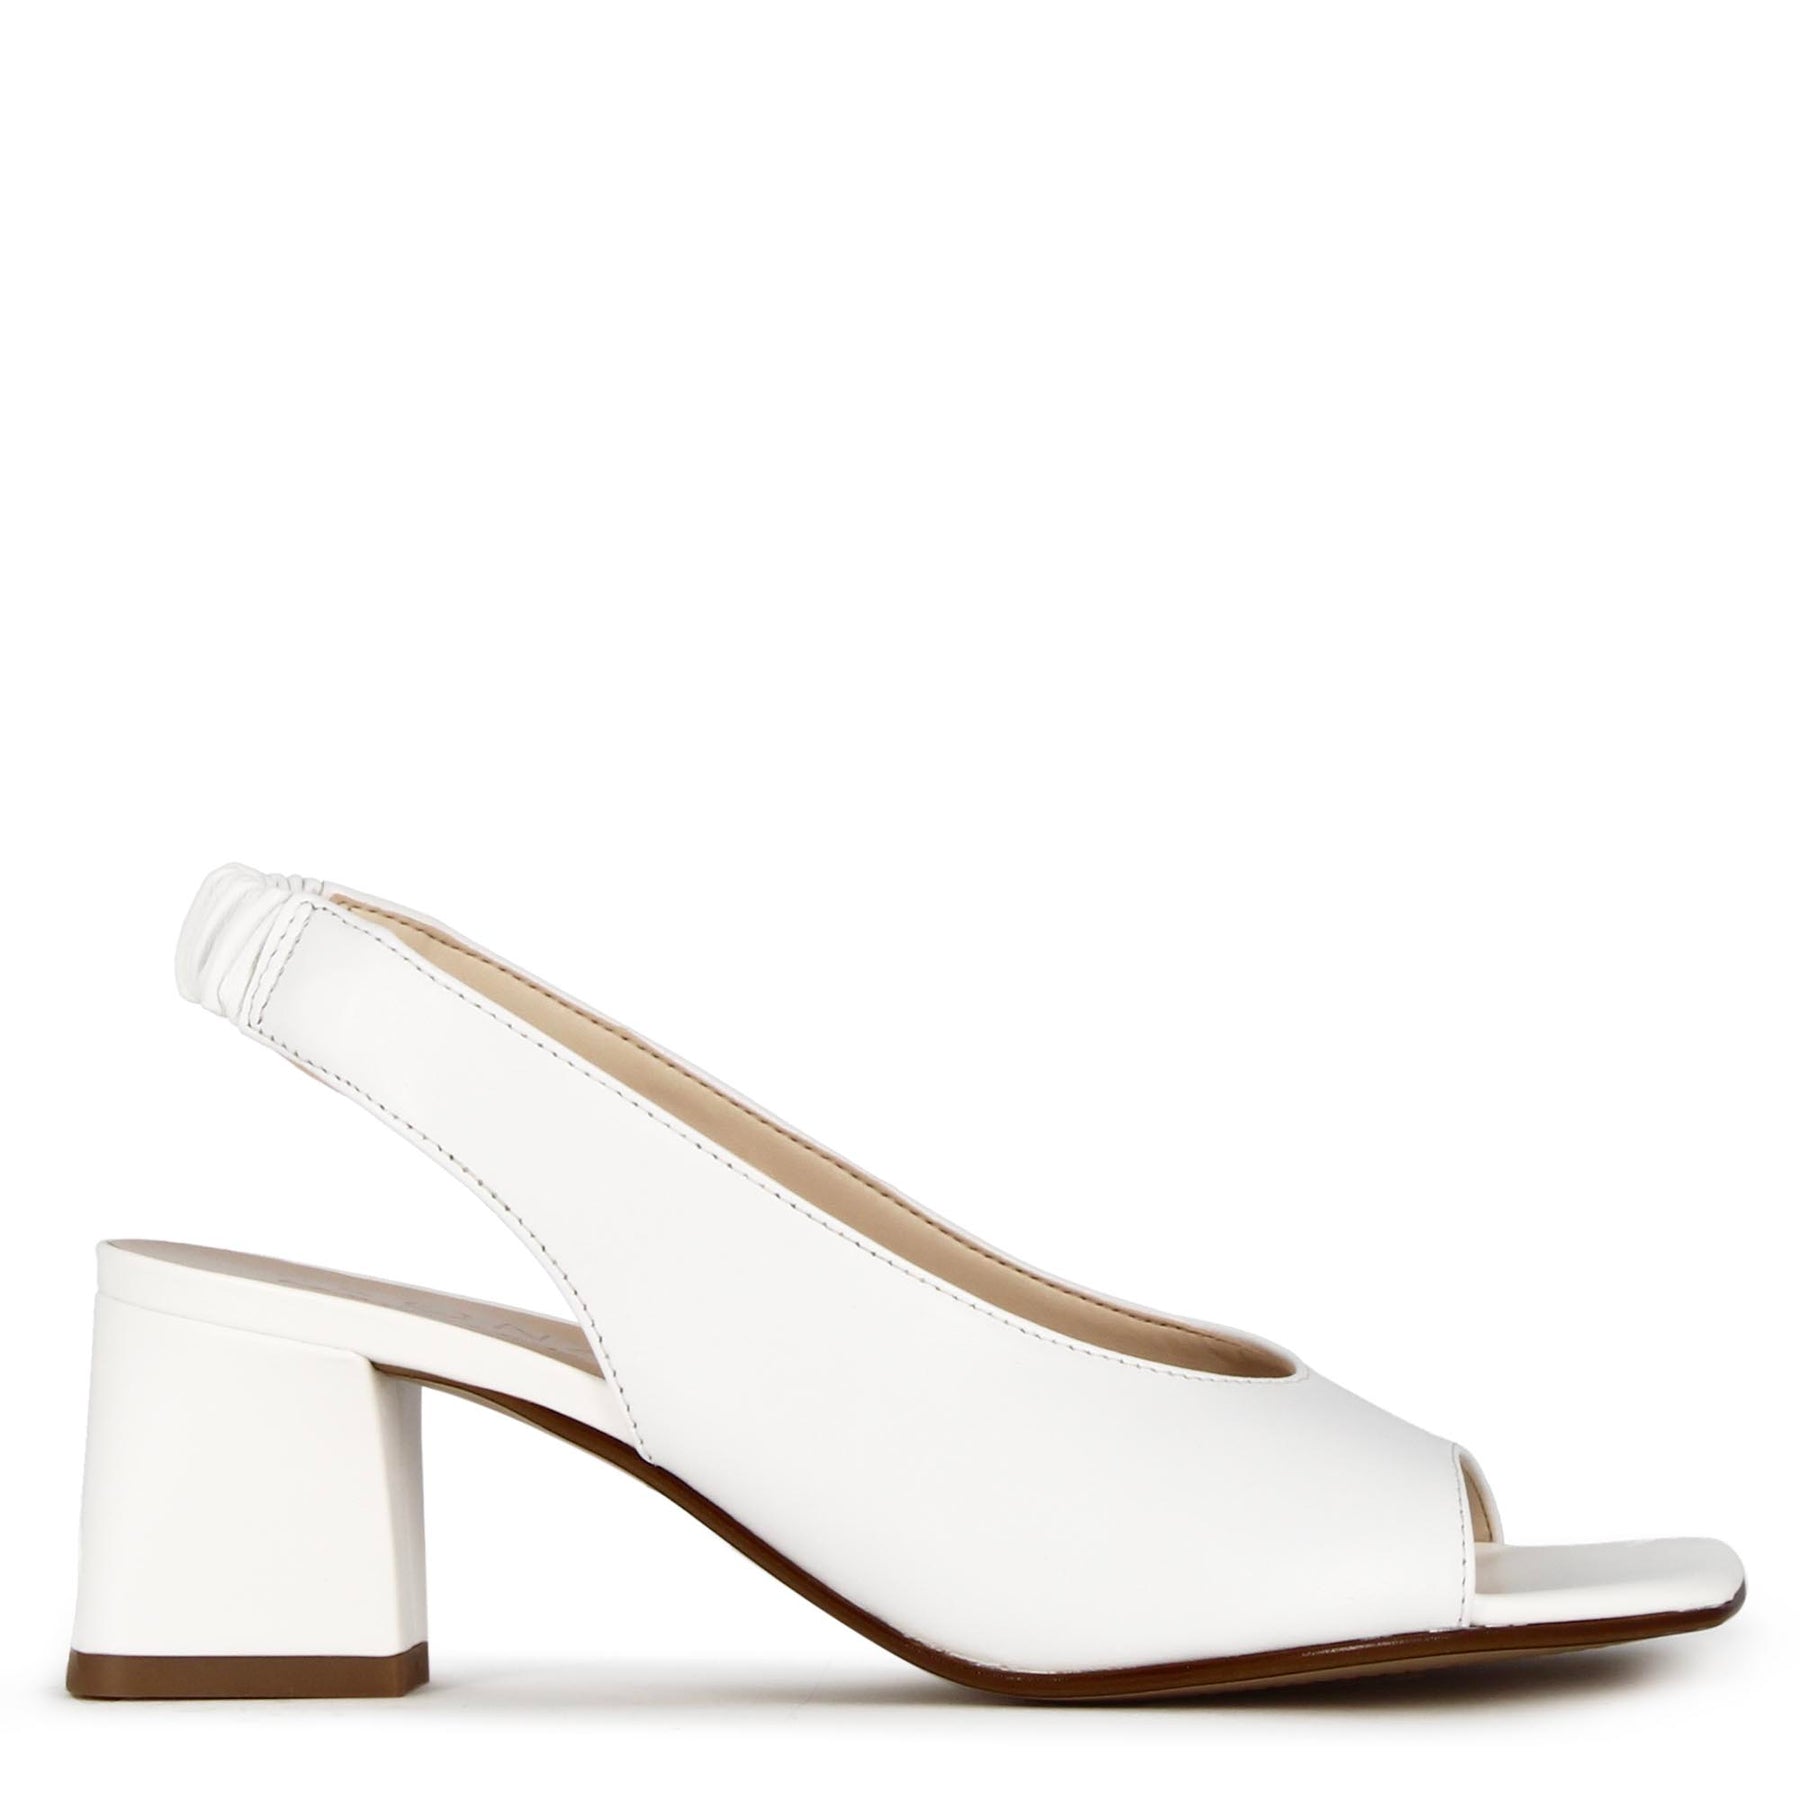 Women's white leather slingback sandal with square toe